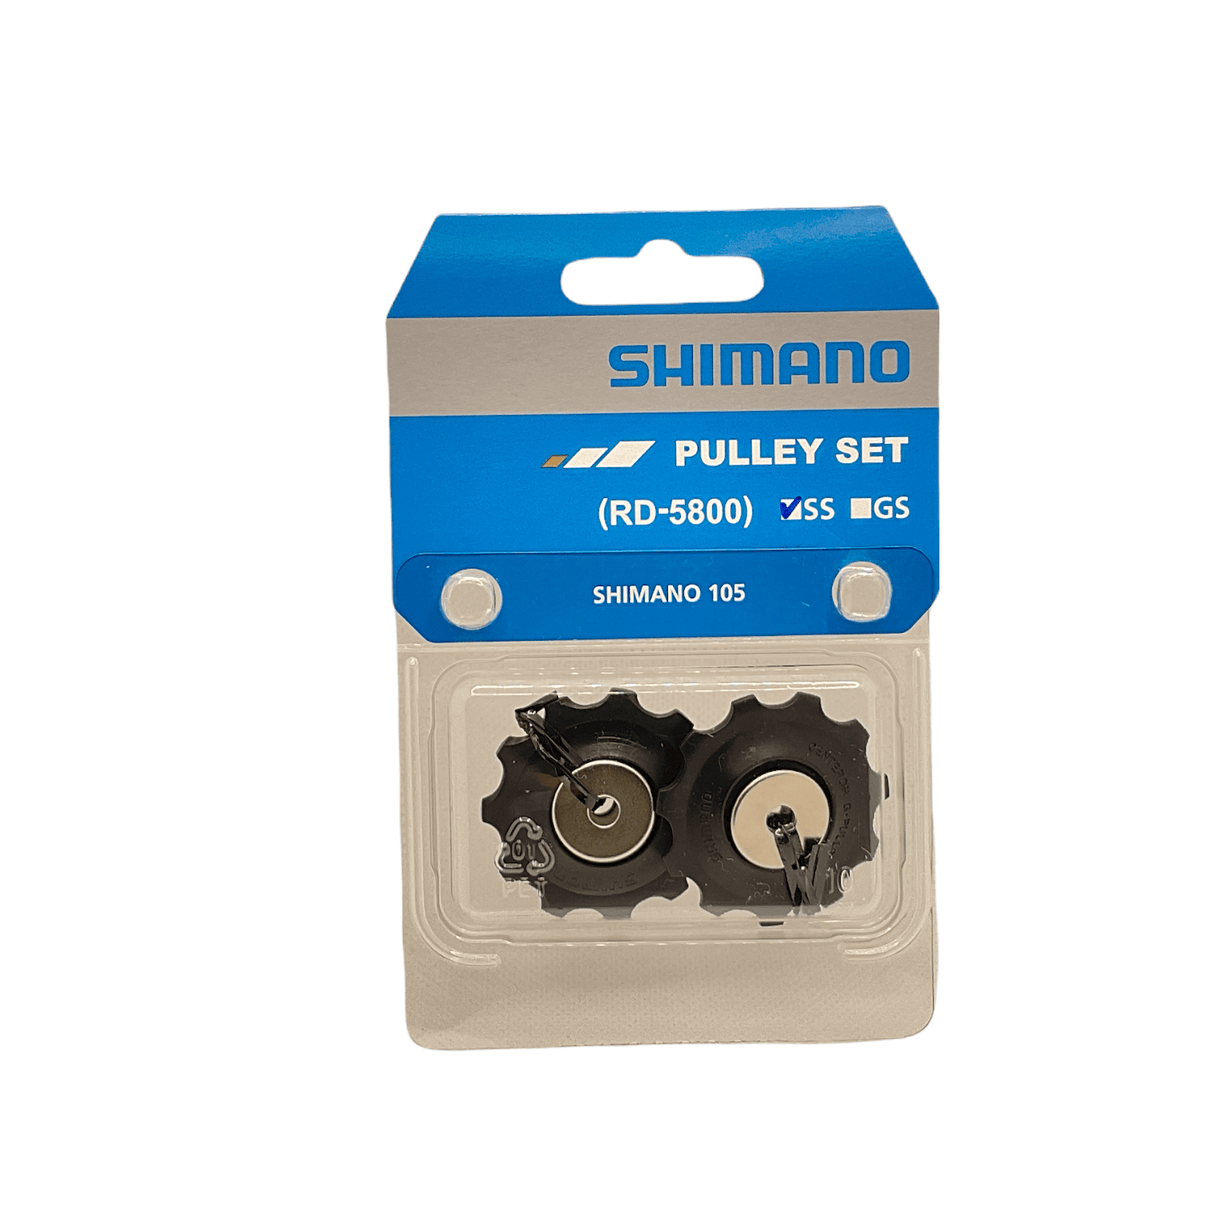 Shimano Spares 105 RD-5800 tension and guide pulley set for SS-type